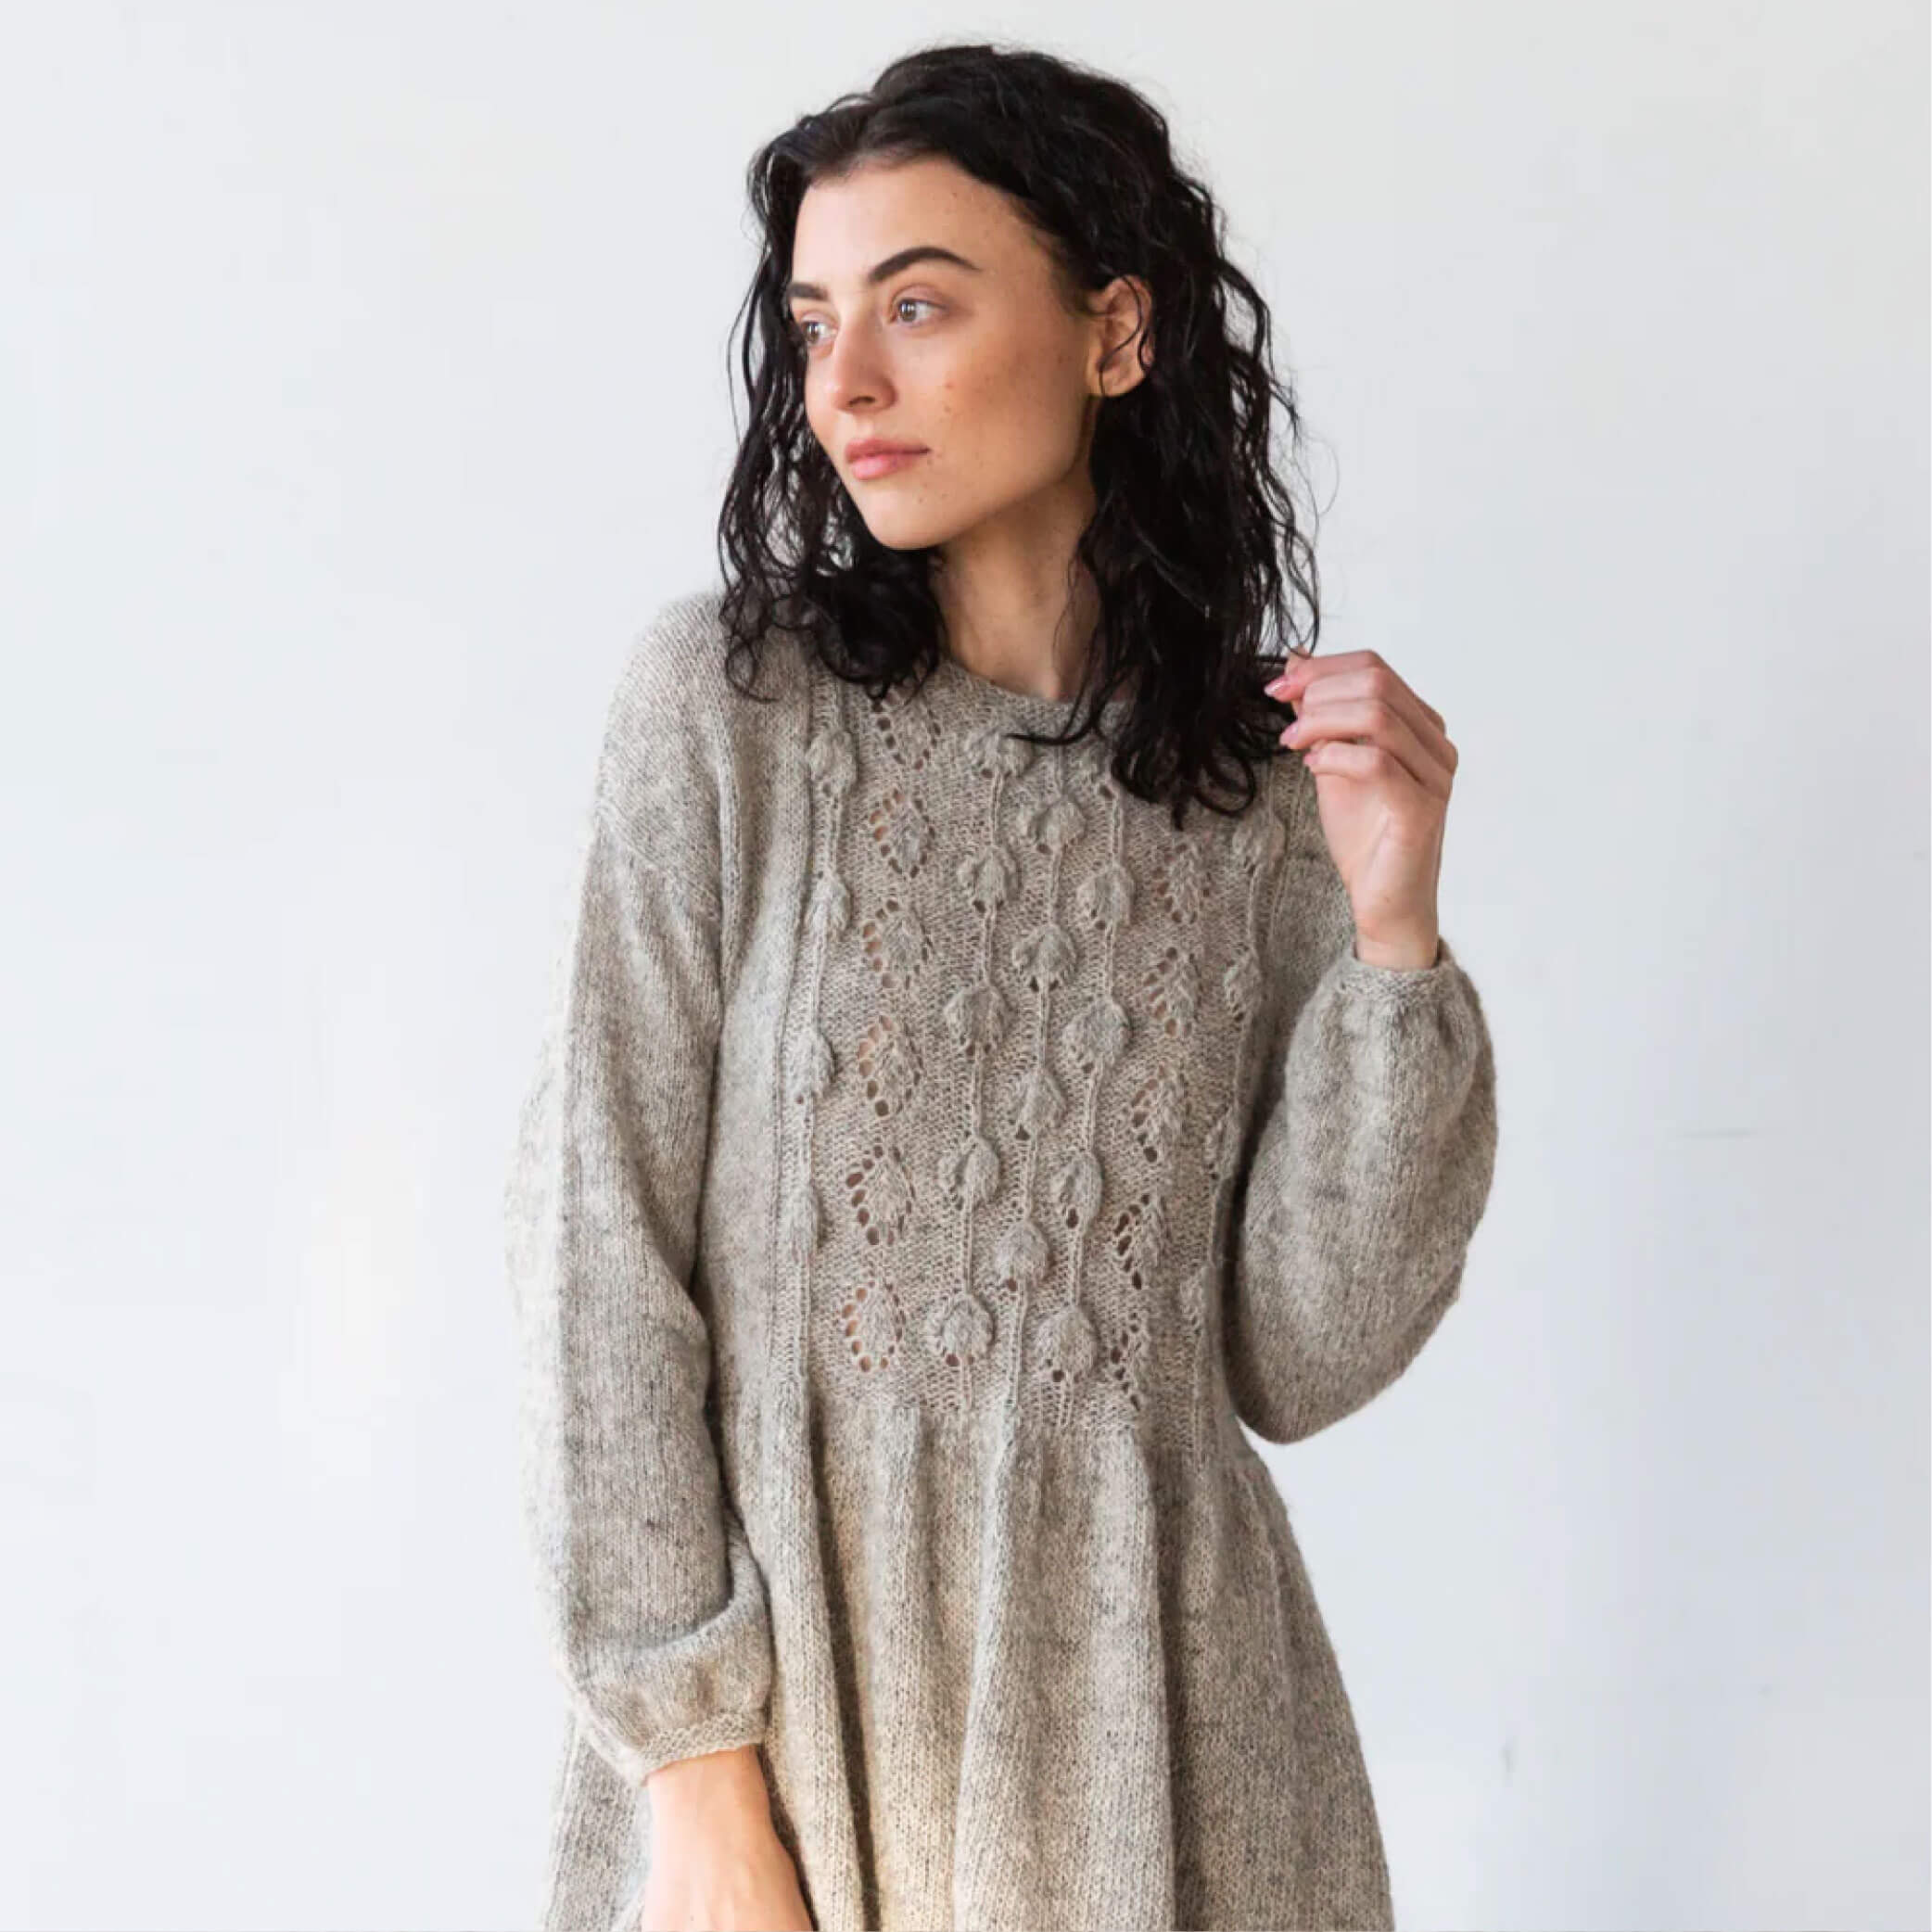 SWEETFERN ニットワンピース レシピ【Owlet】【Quince&Co】【seeknit】【編み図】【パターン】【ニットワンピース】☆レシピ｜syugei